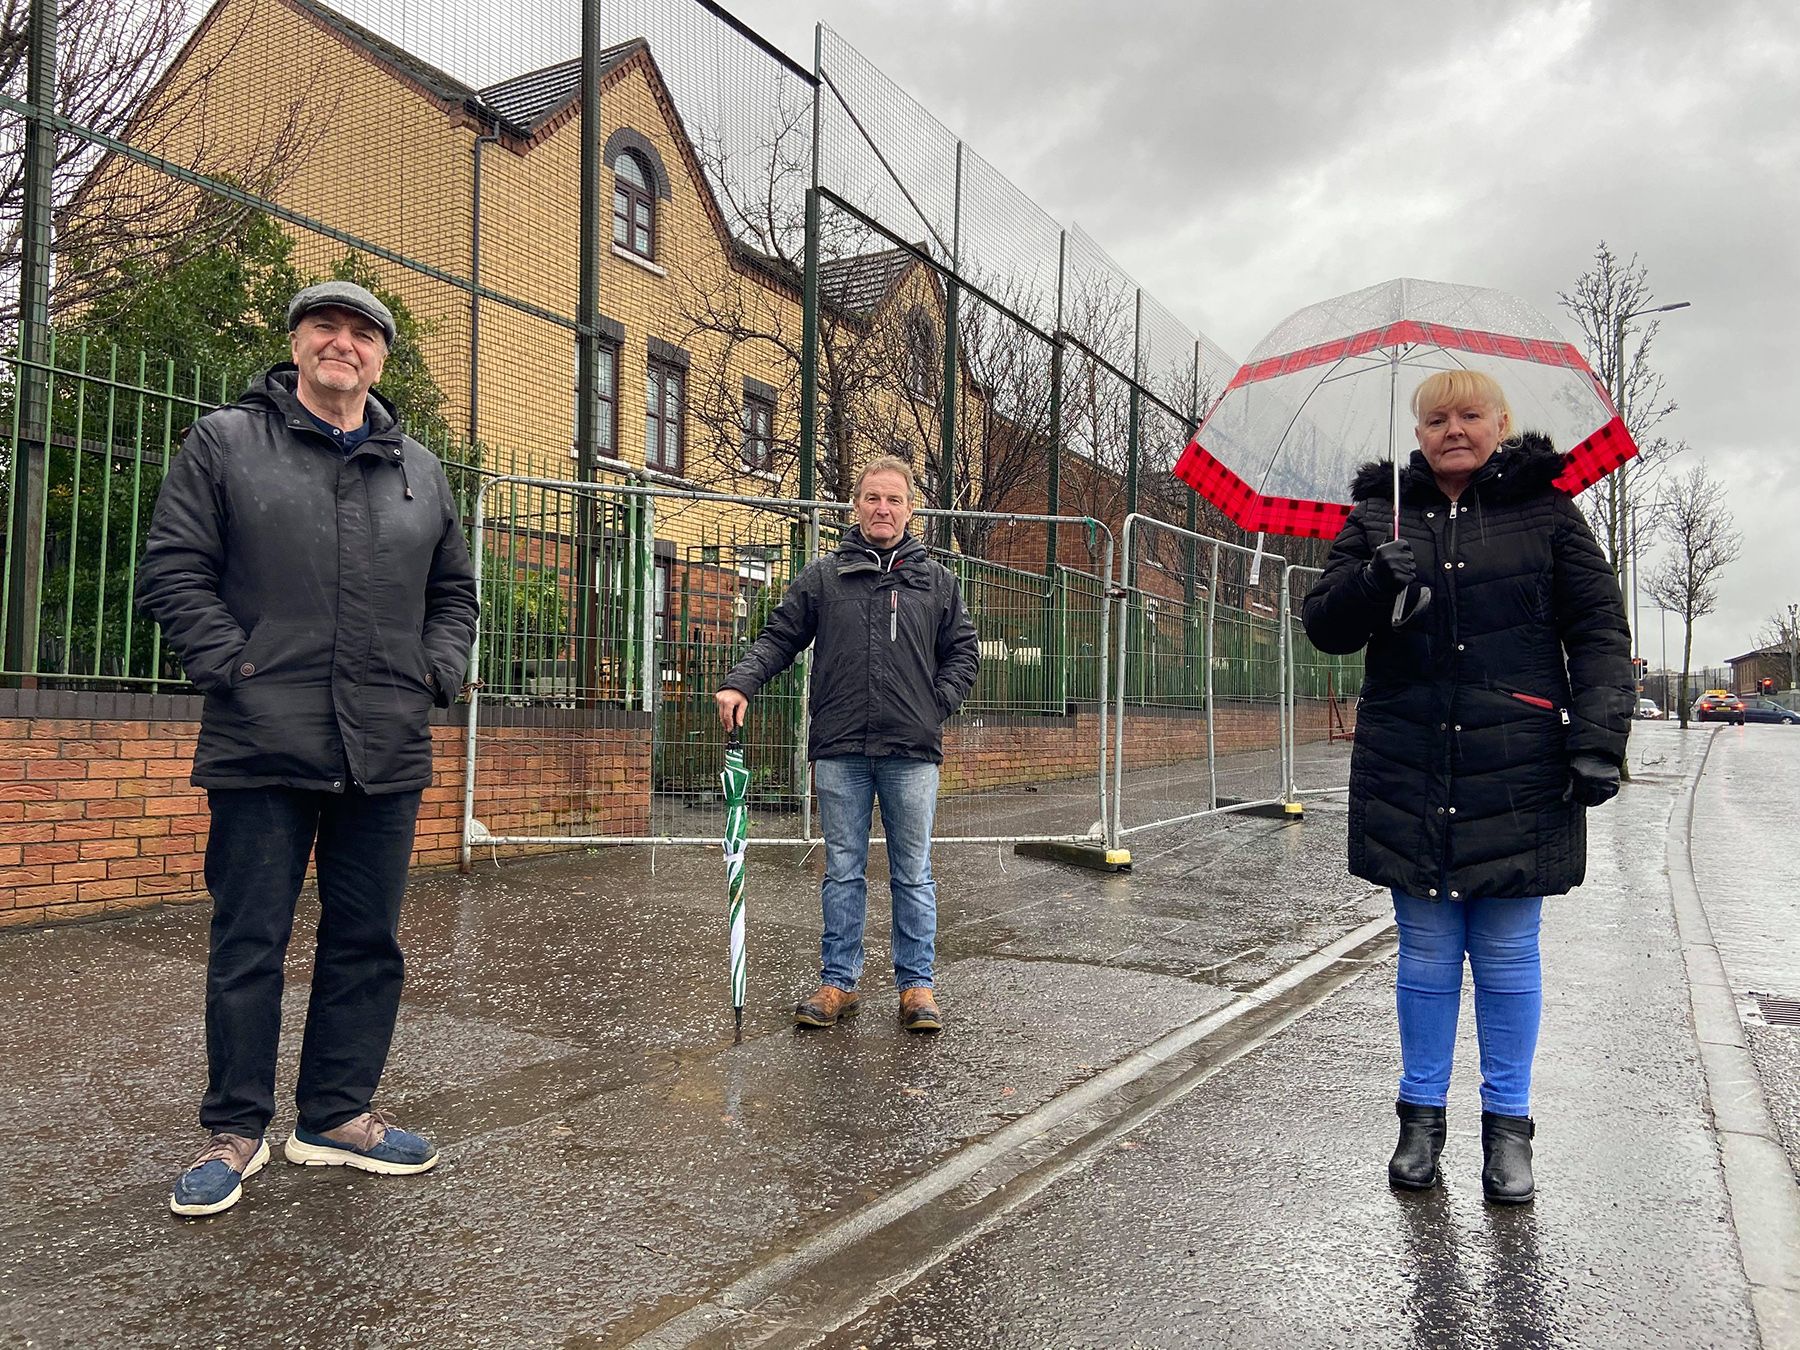 WELCOME: Gerry O’Reilly (New Lodge Housing Forum), Sinn Féin councillor JJ Magee and Kate Clarke (Duncairn Community Partnership) at the fencing which will come down